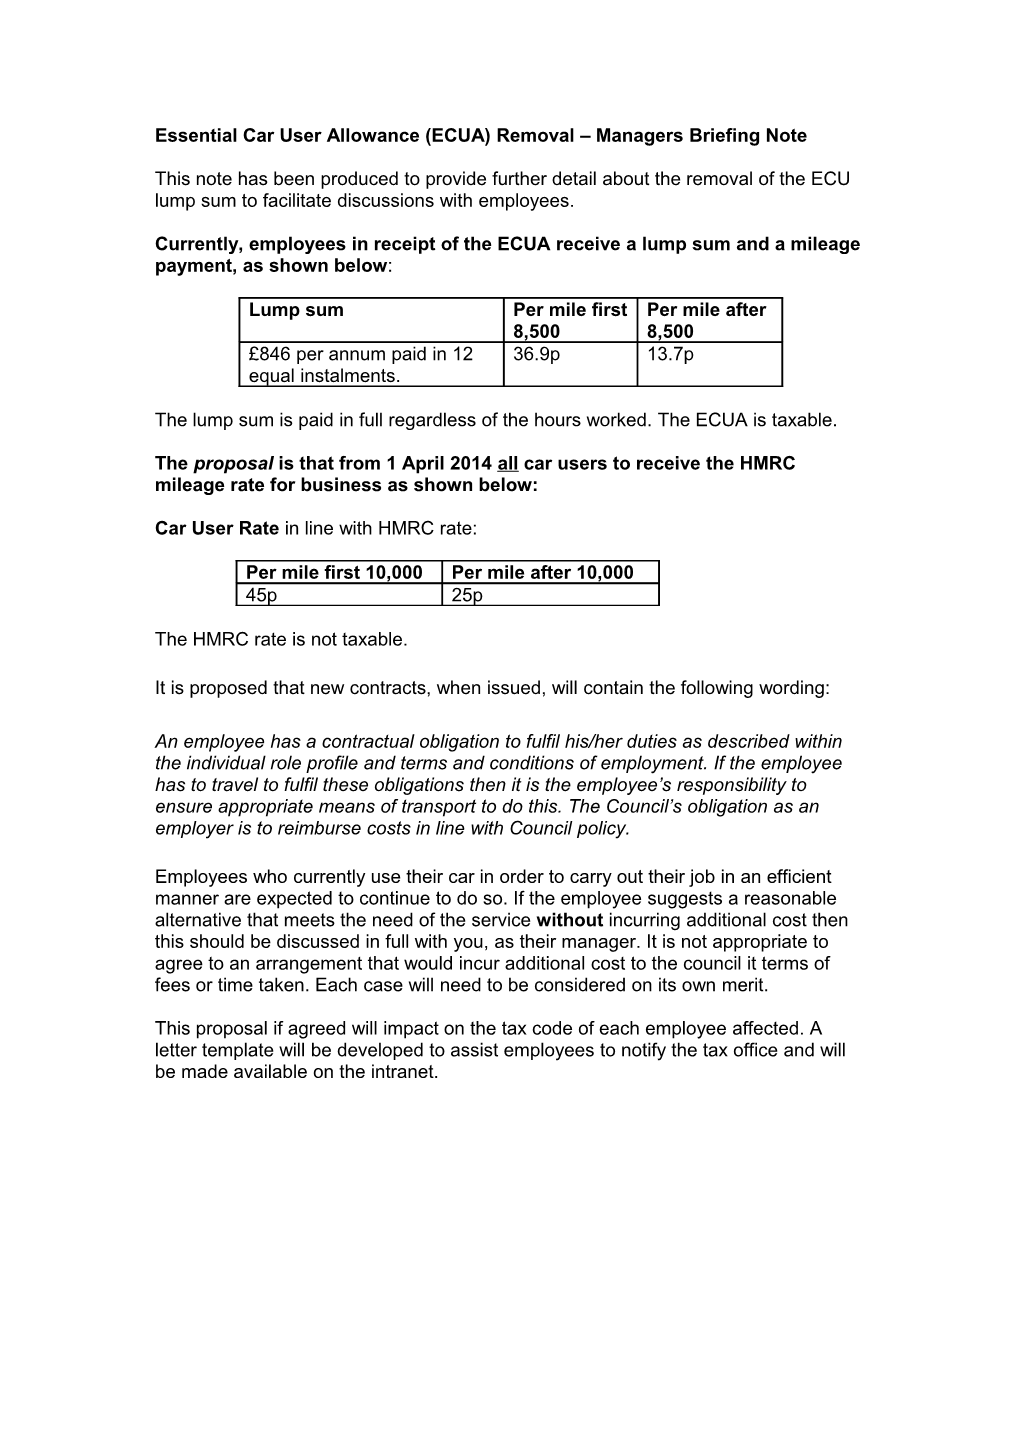 Essential Car User Allowance (ECUA) Removal Managers Briefing Note